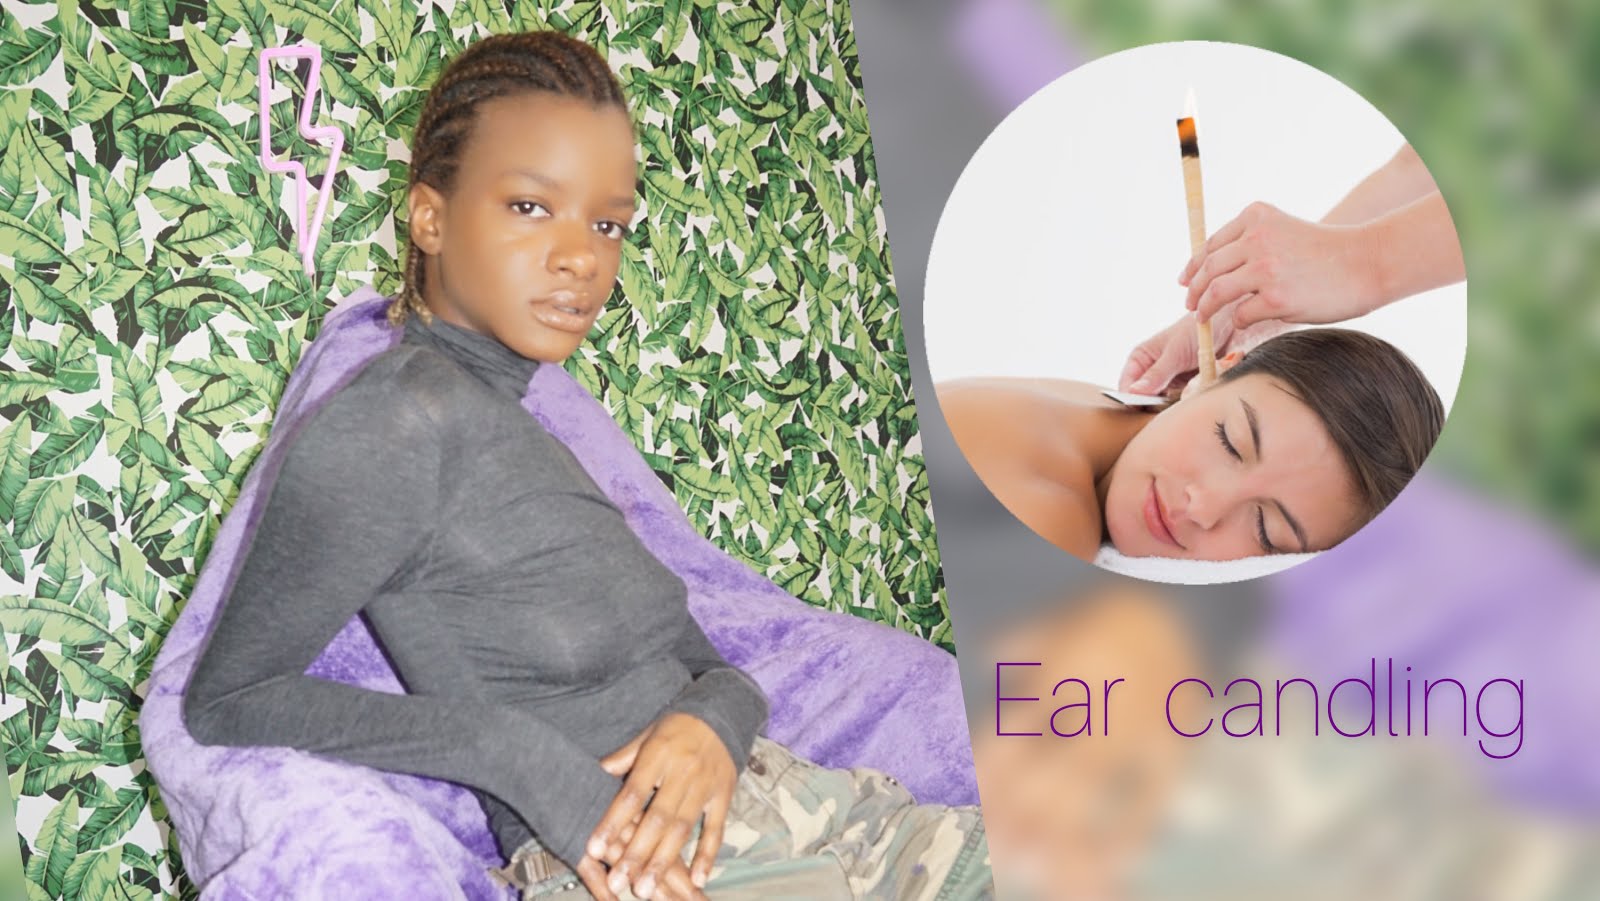 What is Ear Candling?